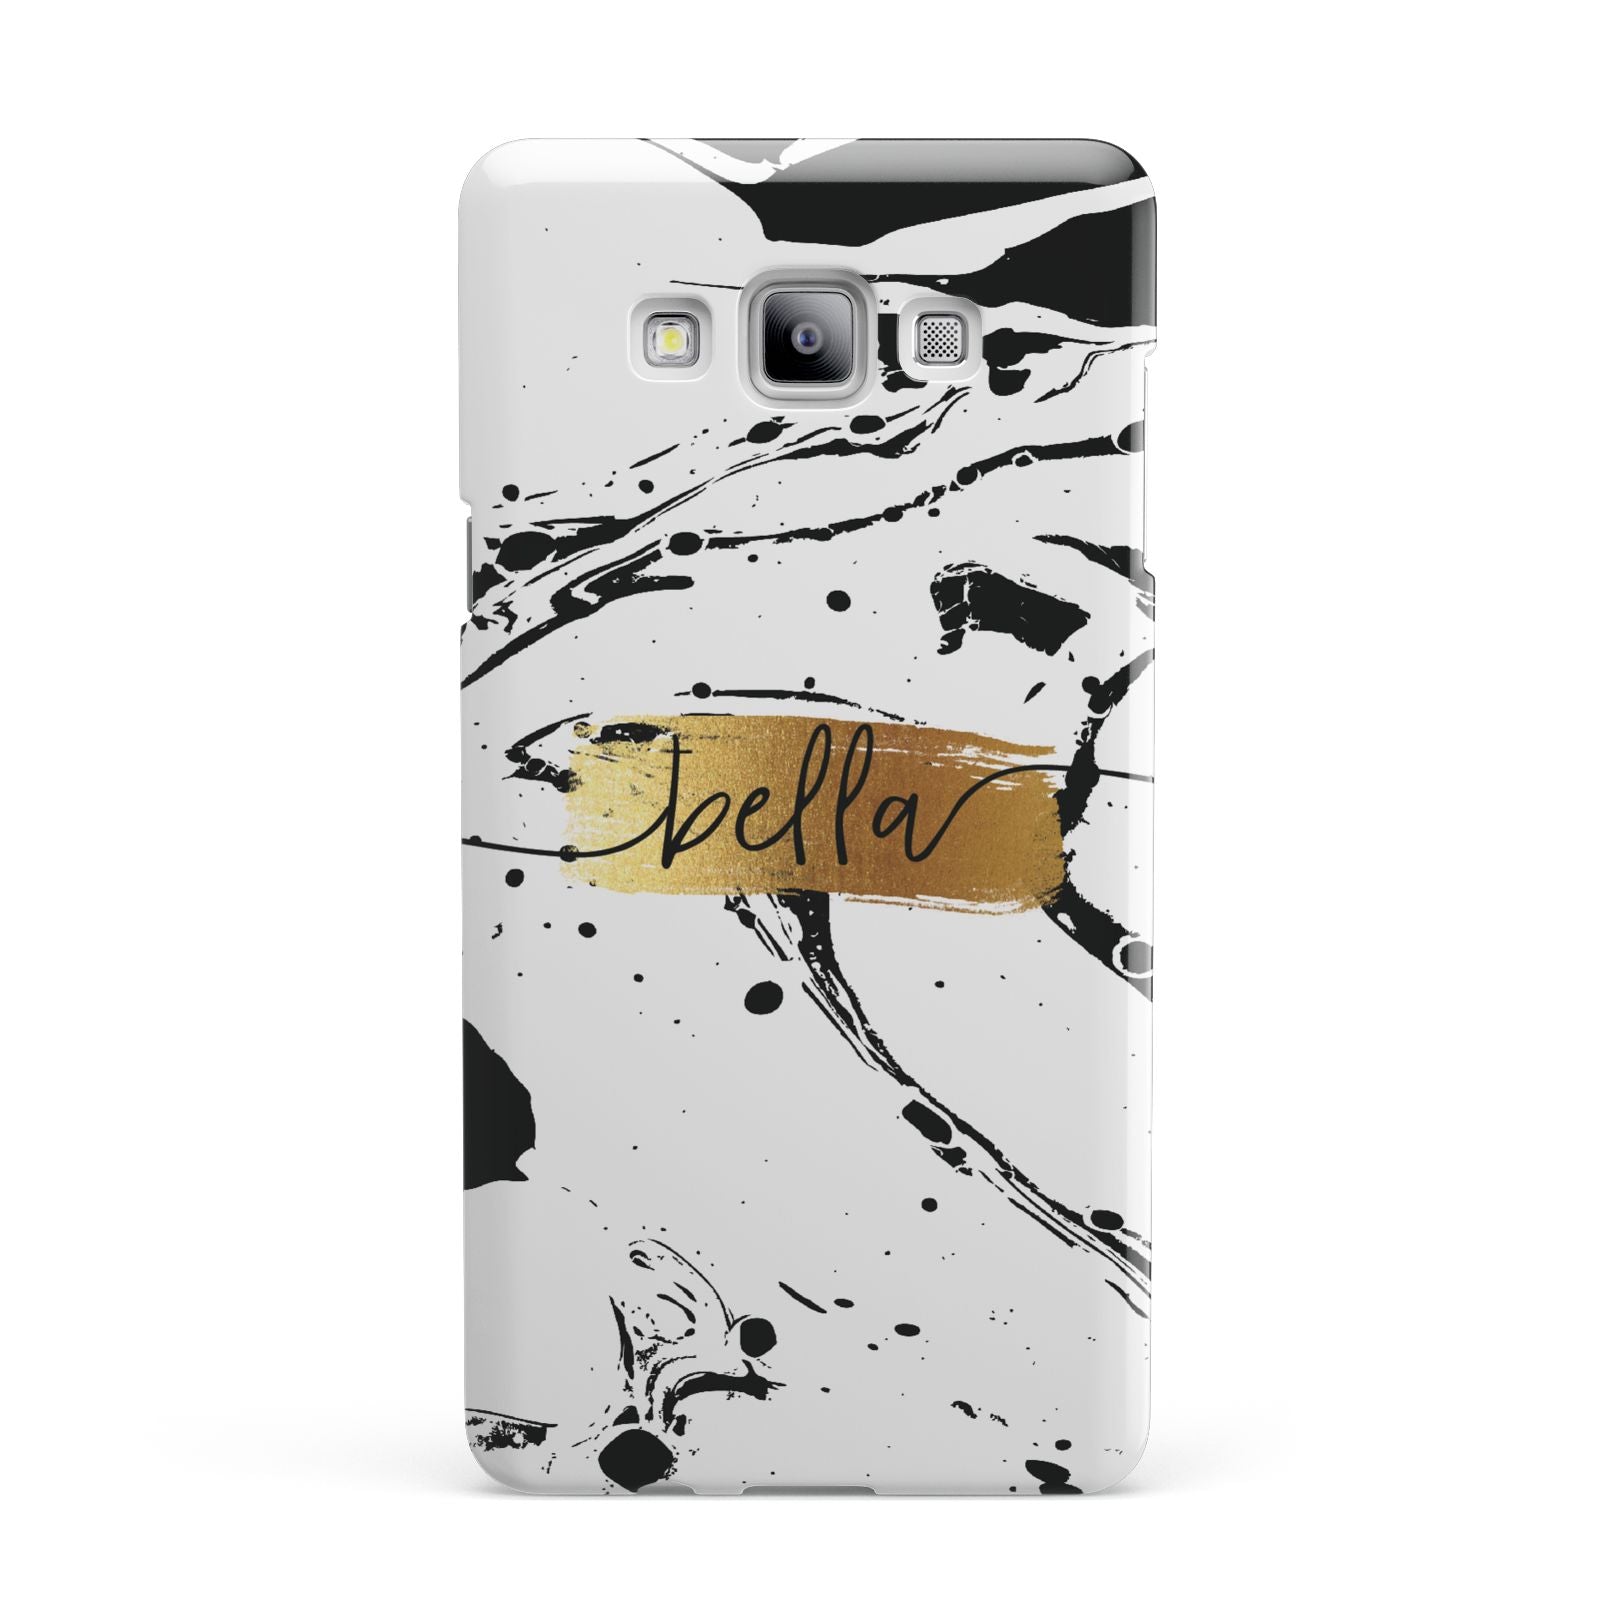 Personalised White Gold Swirl Marble Samsung Galaxy A7 2015 Case